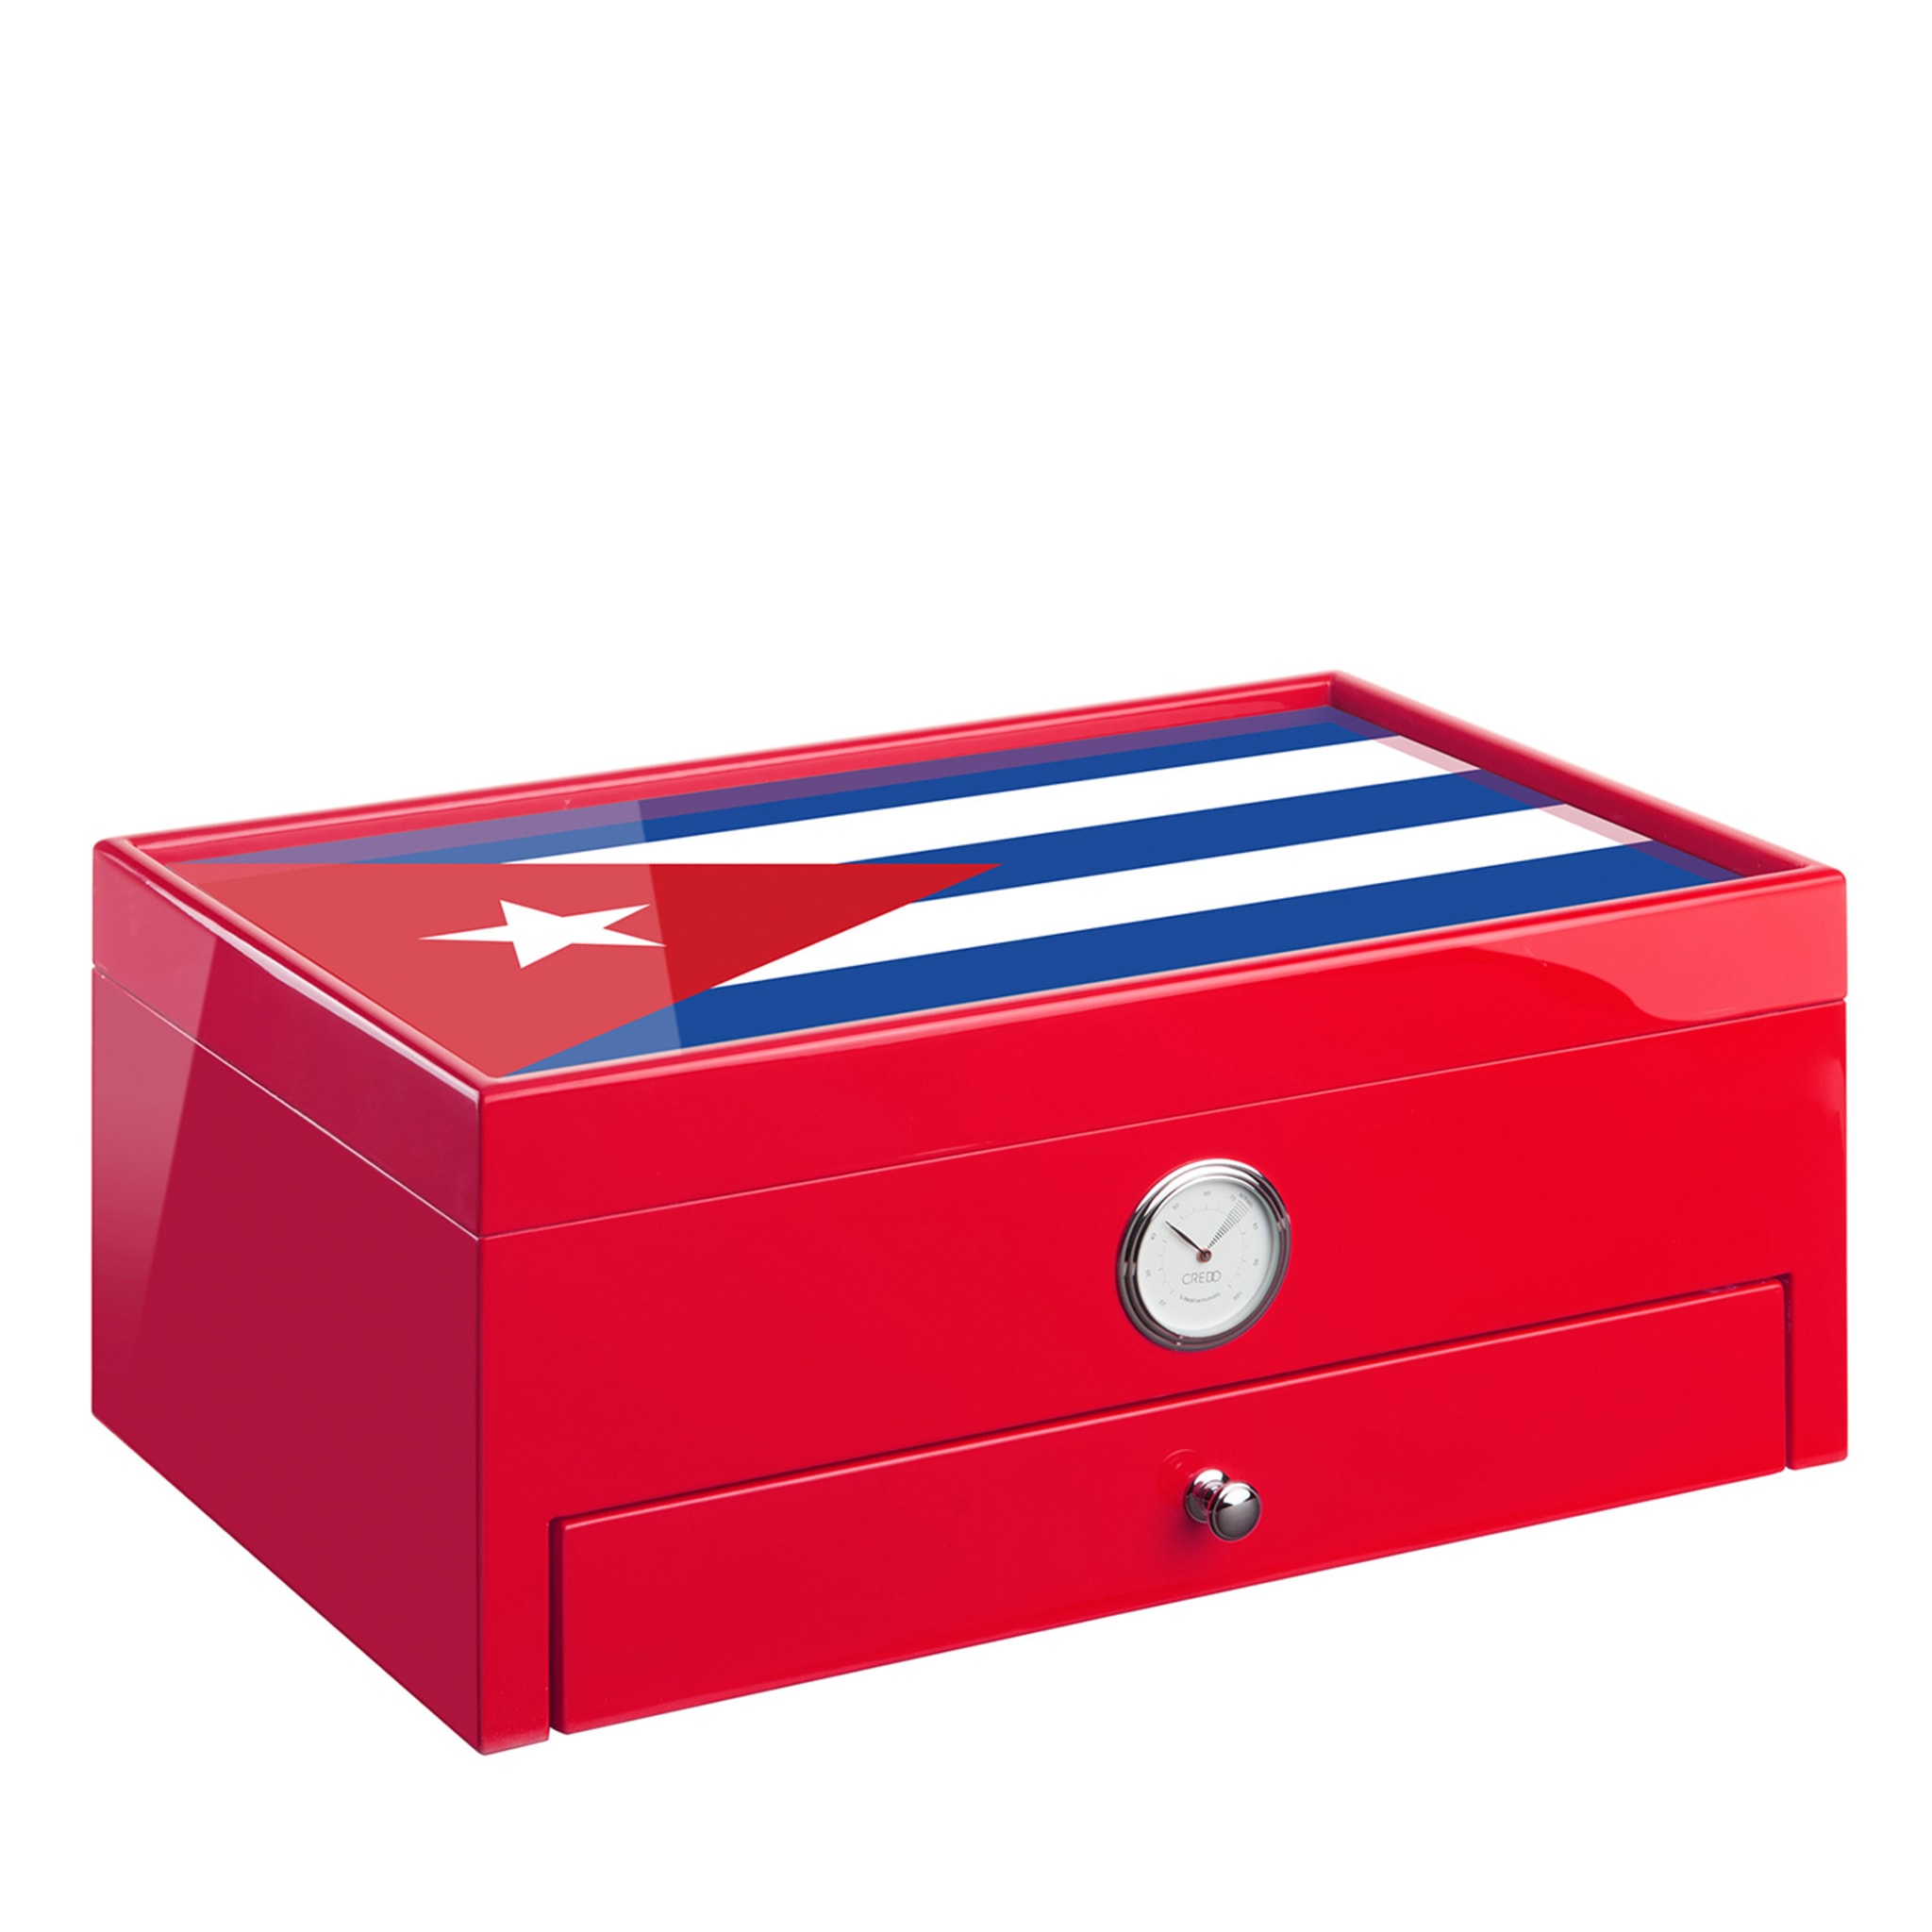 Cuba-inspired Red Humidor (Special Club Edition)  - Main view